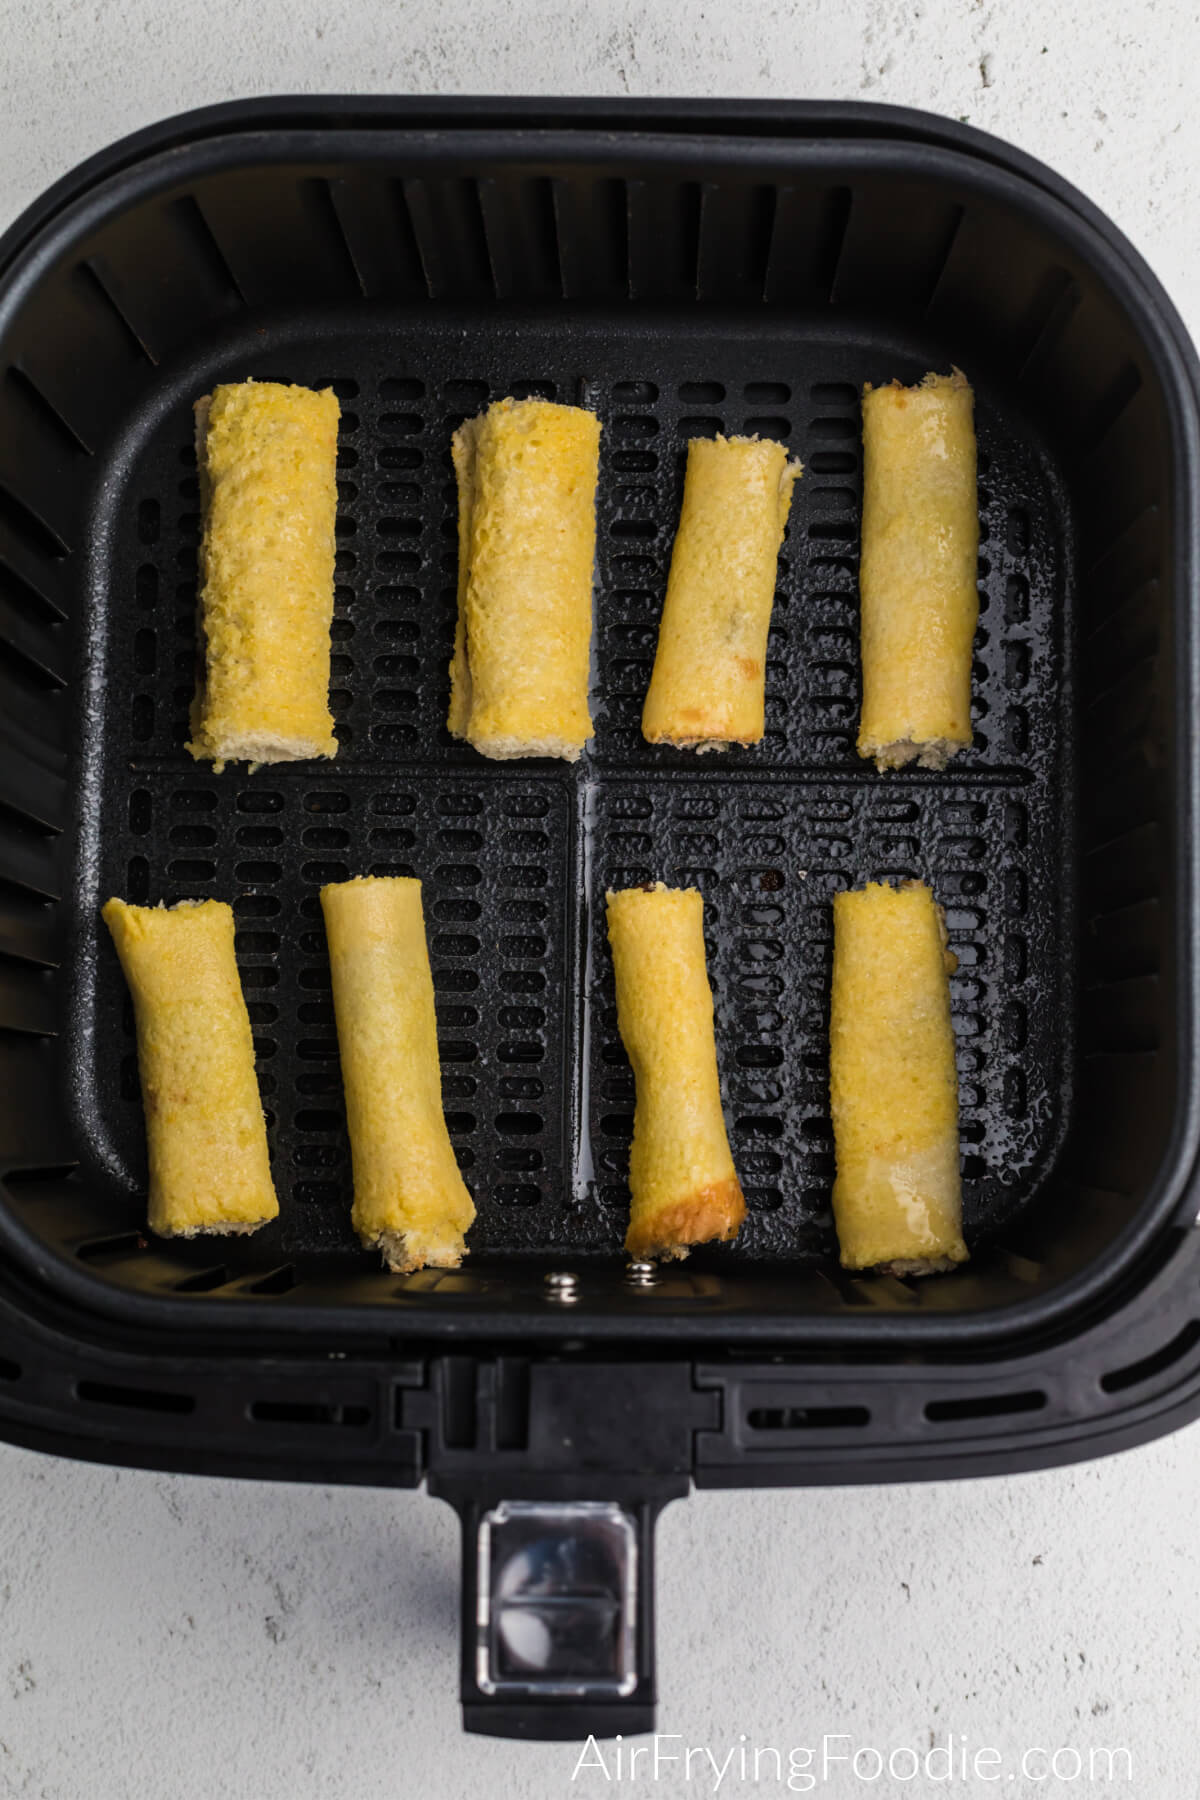 Nutella french toast roll ups in the air fryer basket ready to cook. 